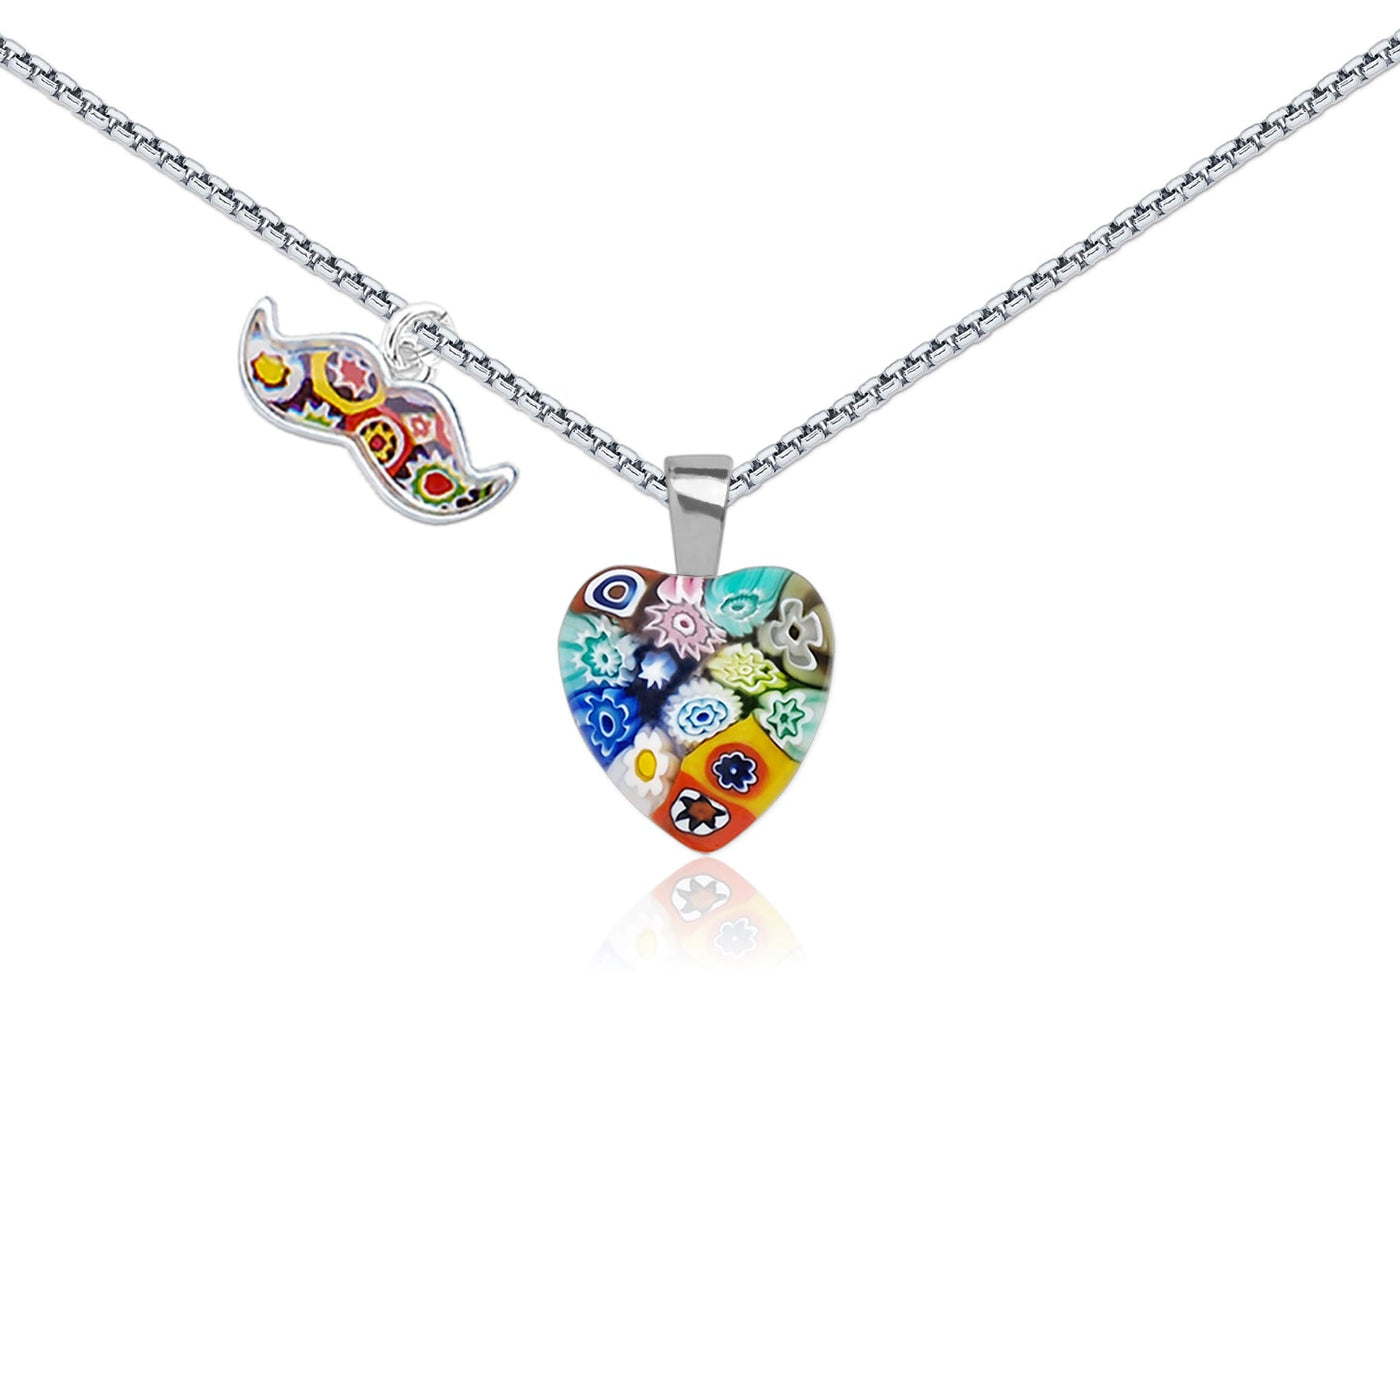 Mini Heart in Bloom Necklace - 13mm - Pendant Necklace